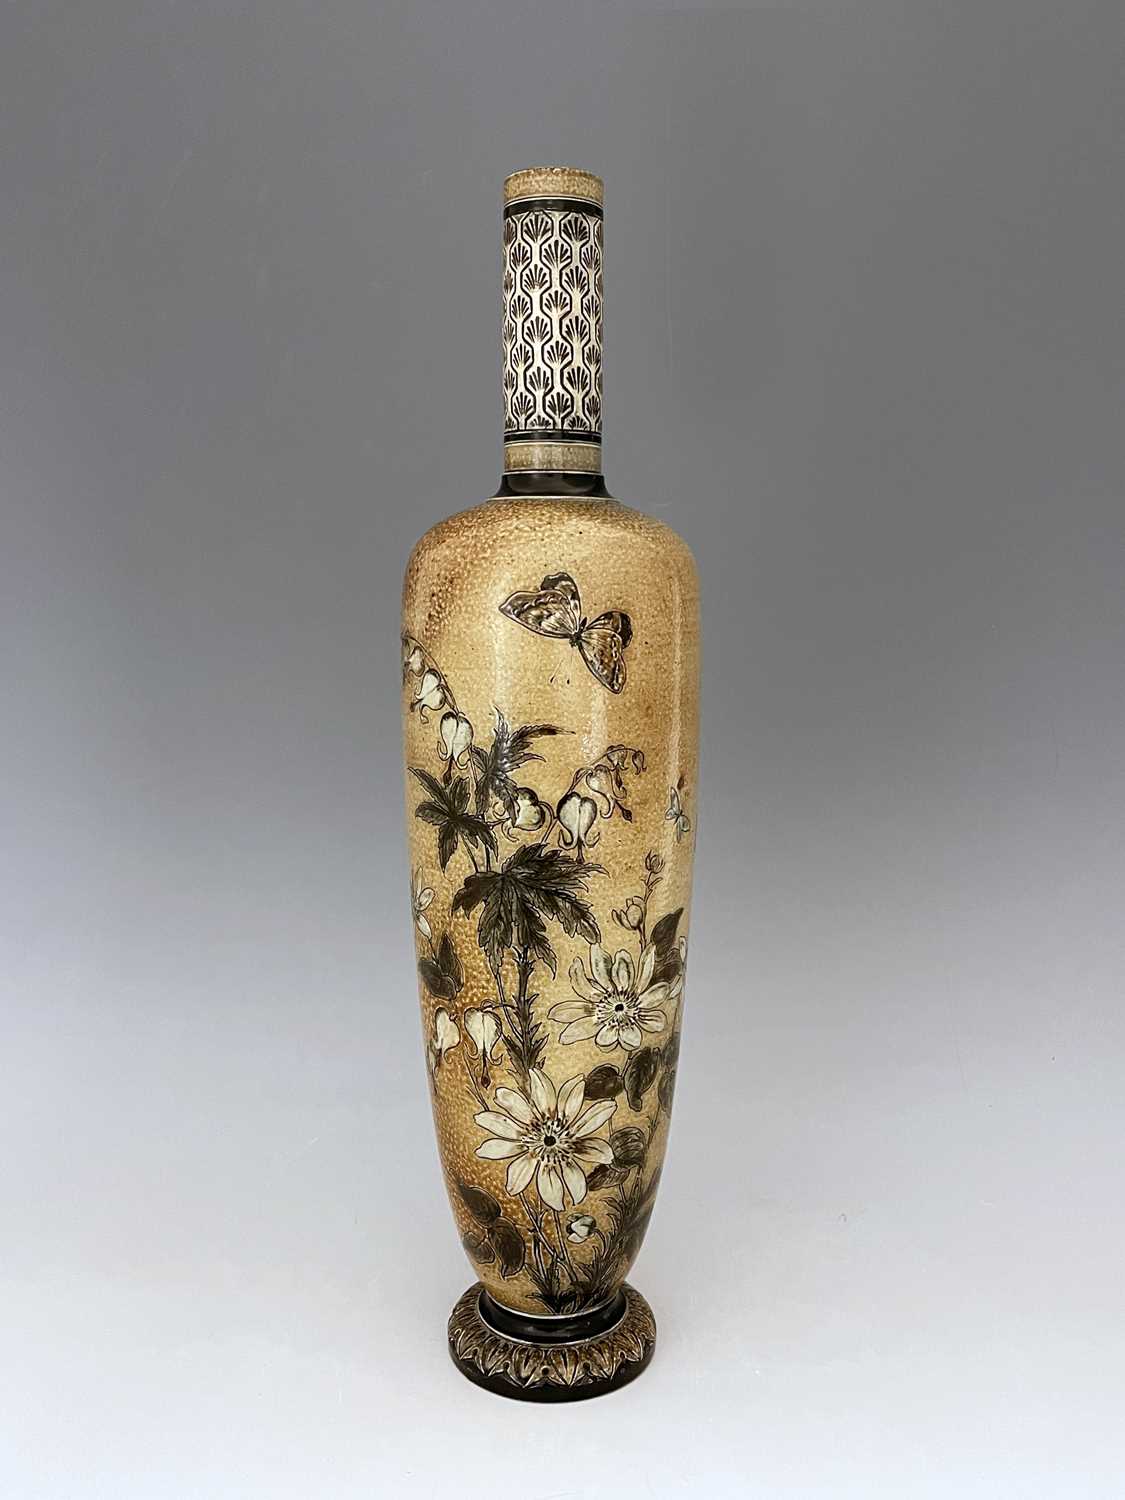 Edwin Martin for Martin Brothers, a large stoneware Wildflower vase, 1886, shouldered footed form